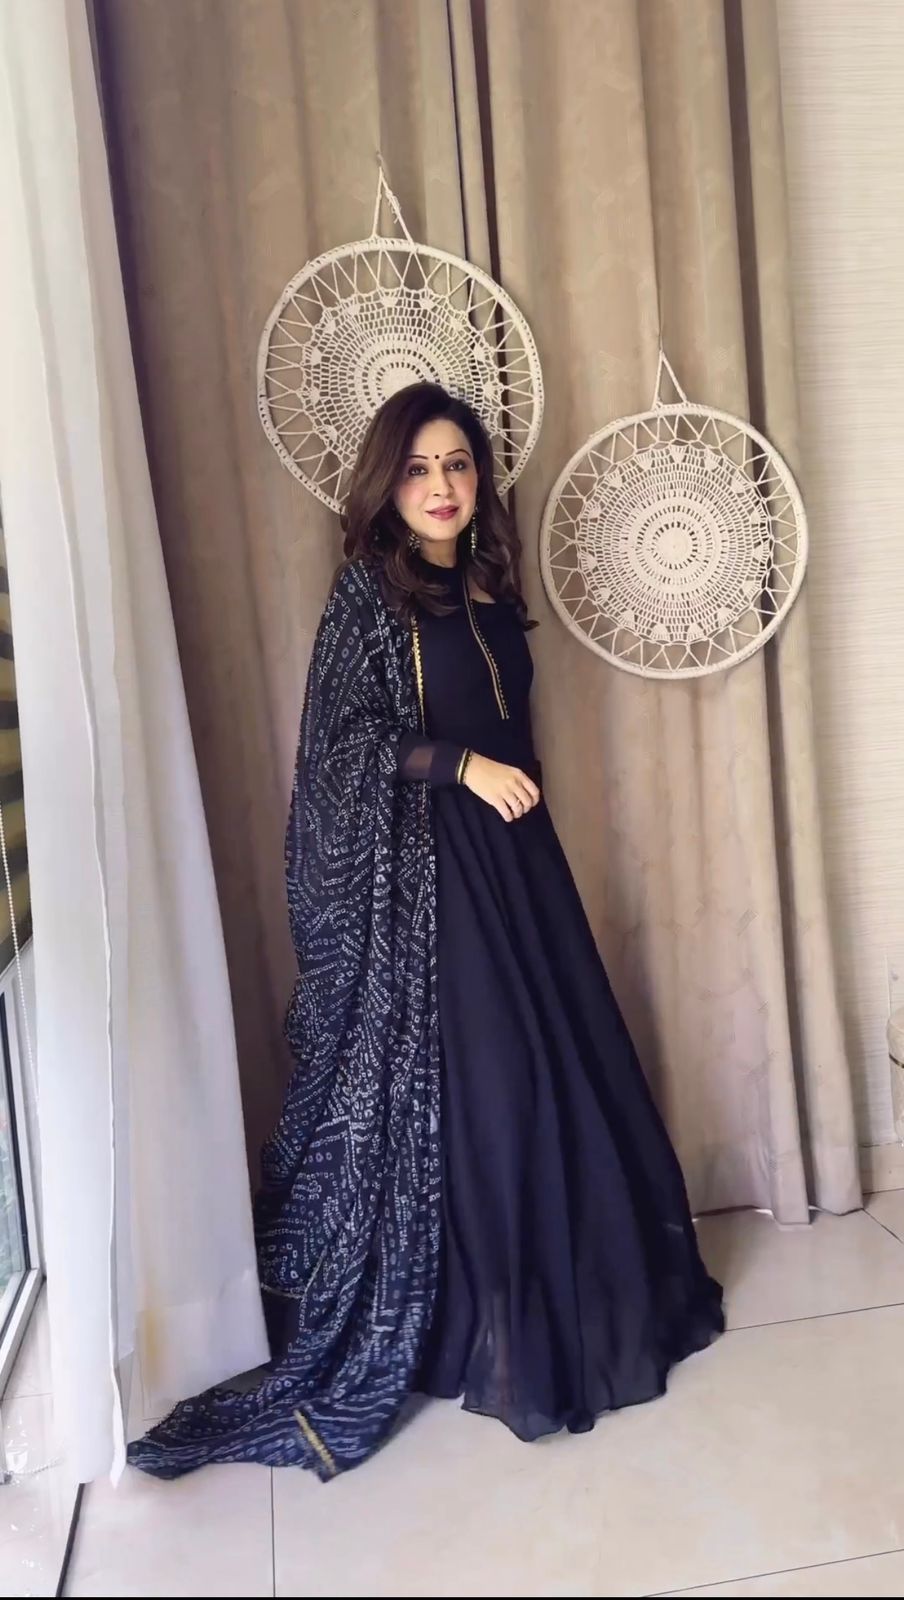 Outstanding Black Color Gown With Bandhani Dupatta